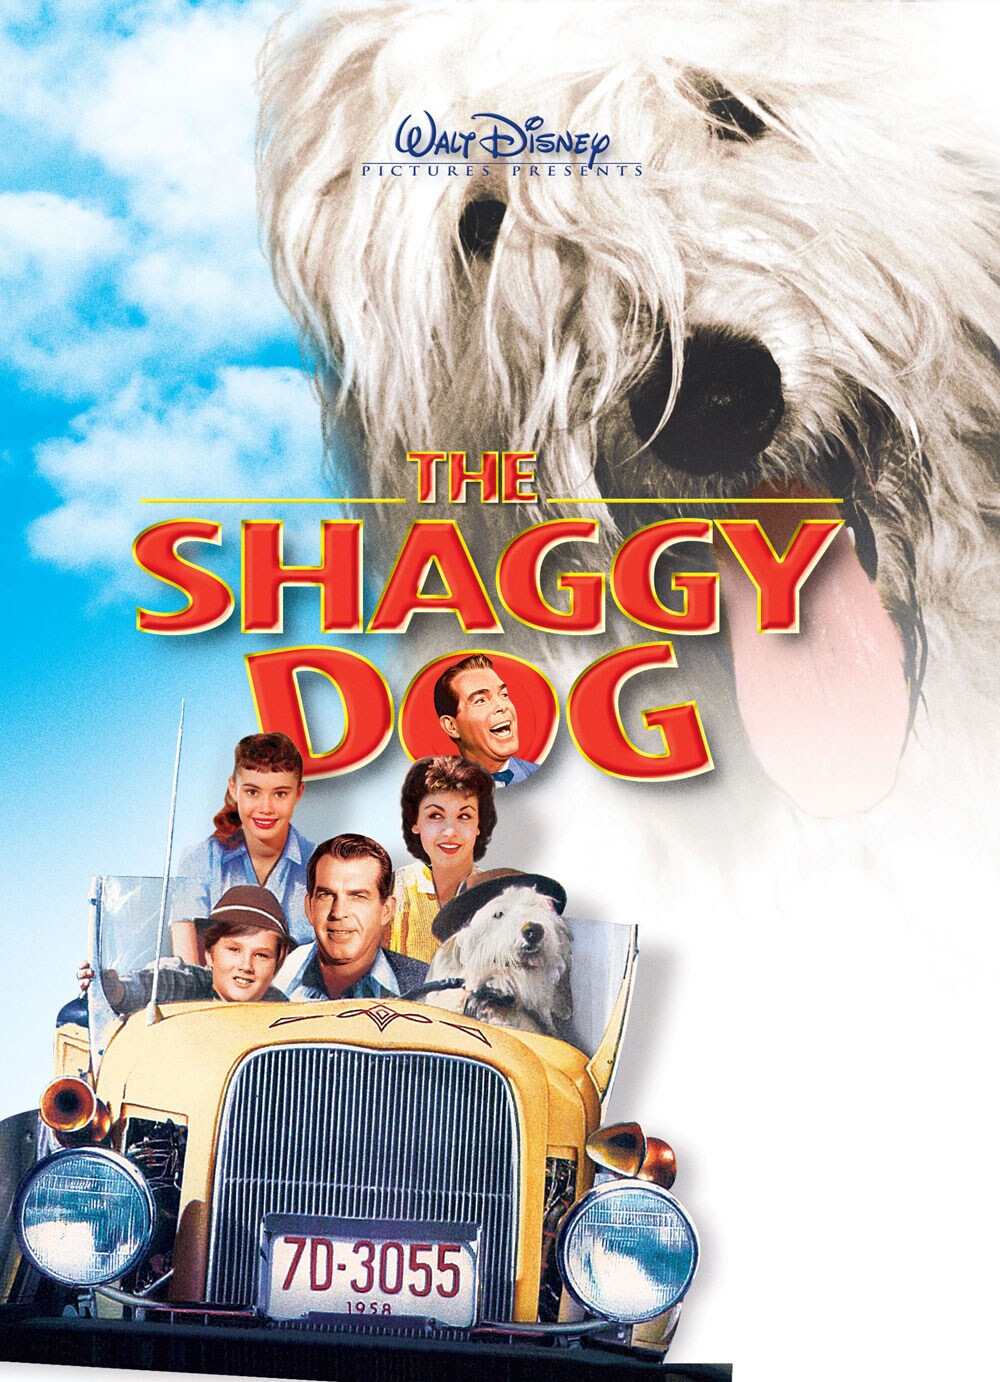 what kind of dog is shaggy da